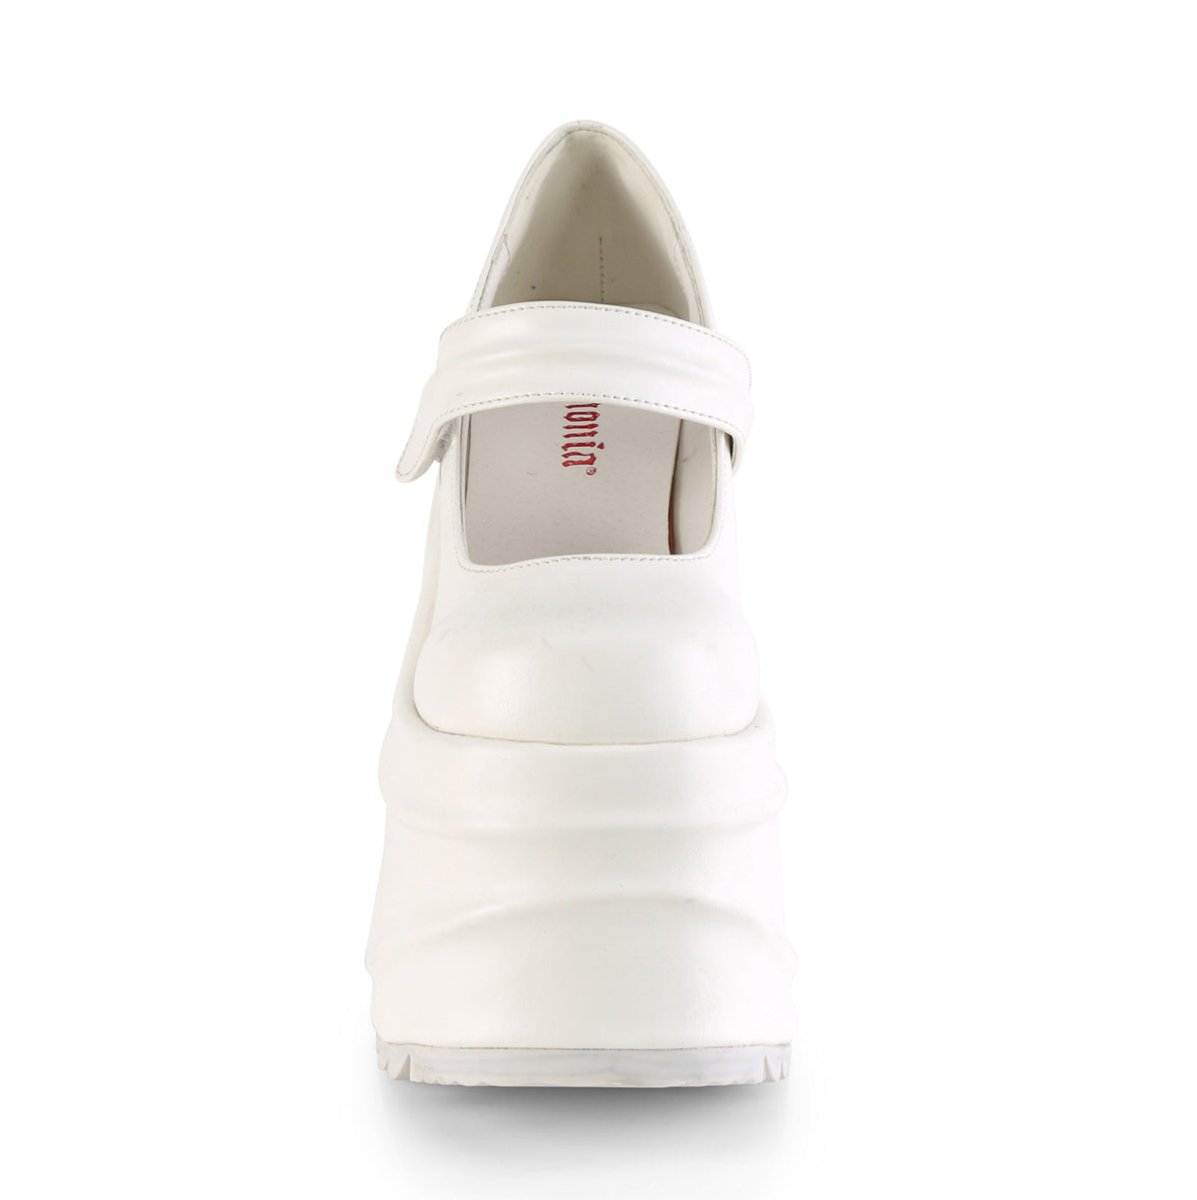 Too Fast | Demonia Wave 32 | White Vegan Leather Women's Mary Janes